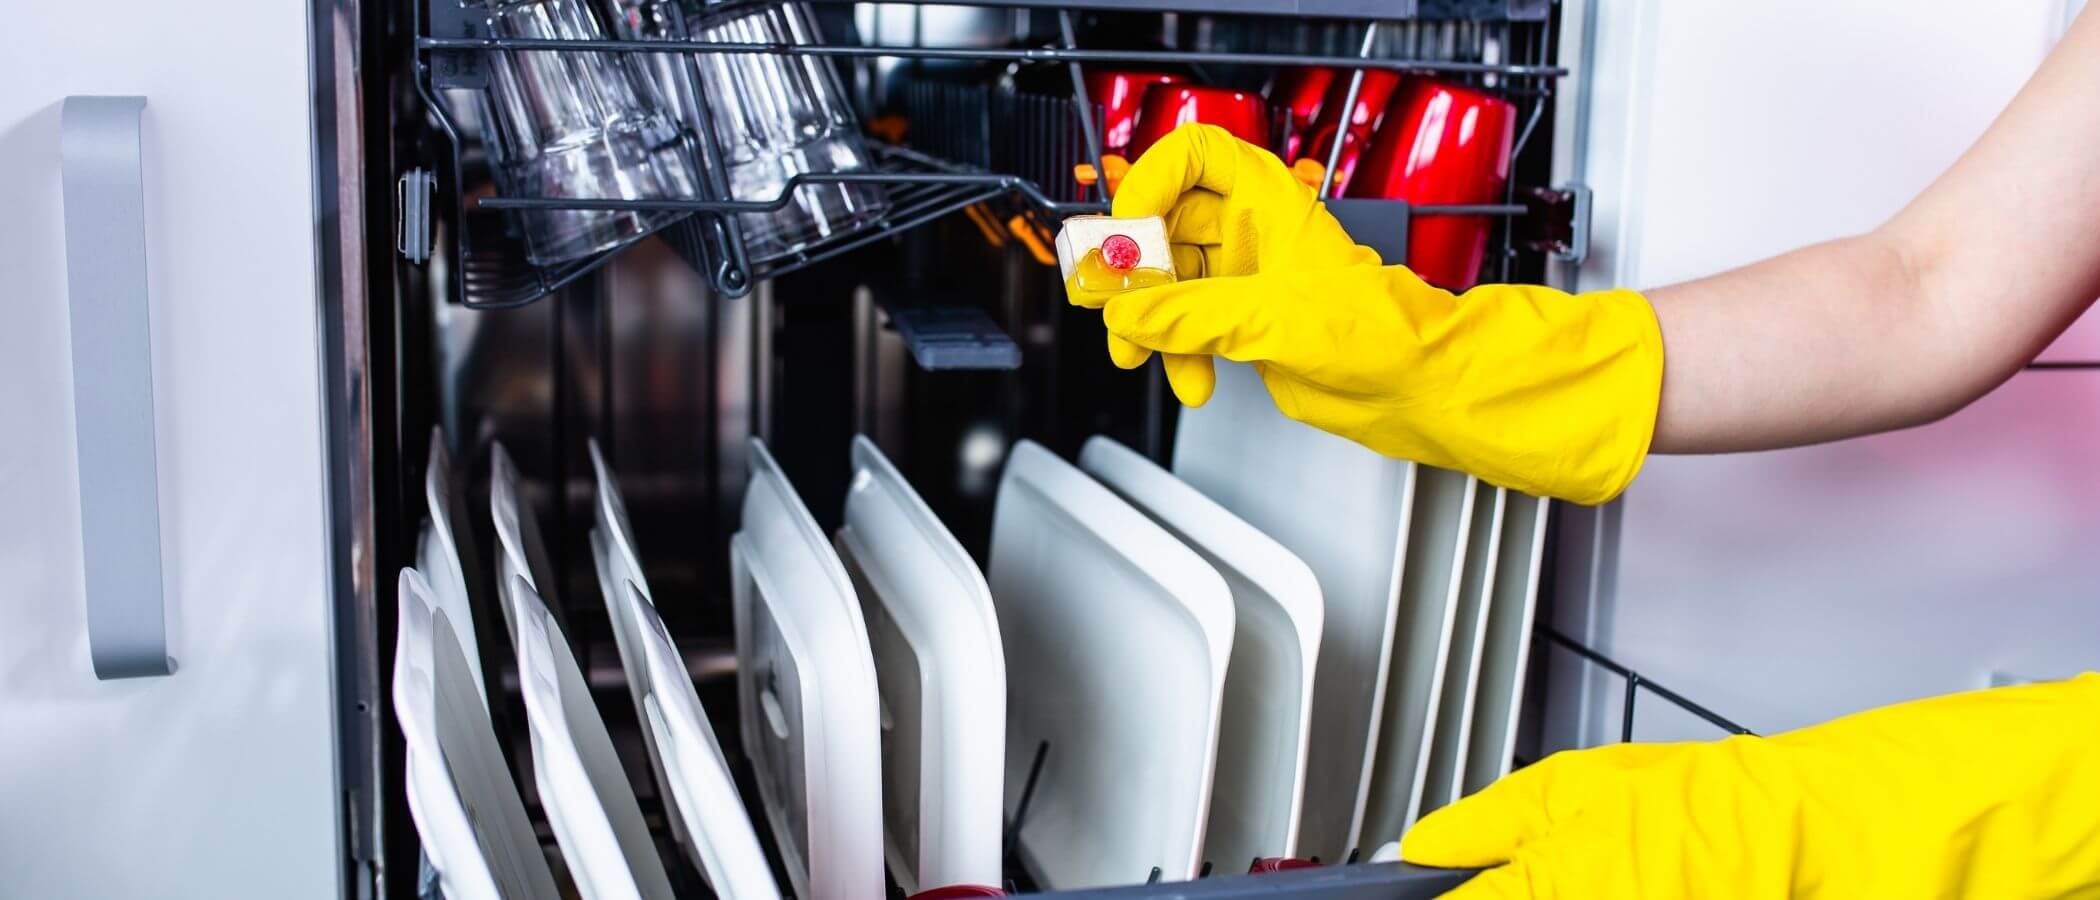 Dishwasher Smells Bad? Here's How to Clean It. - Unit ...